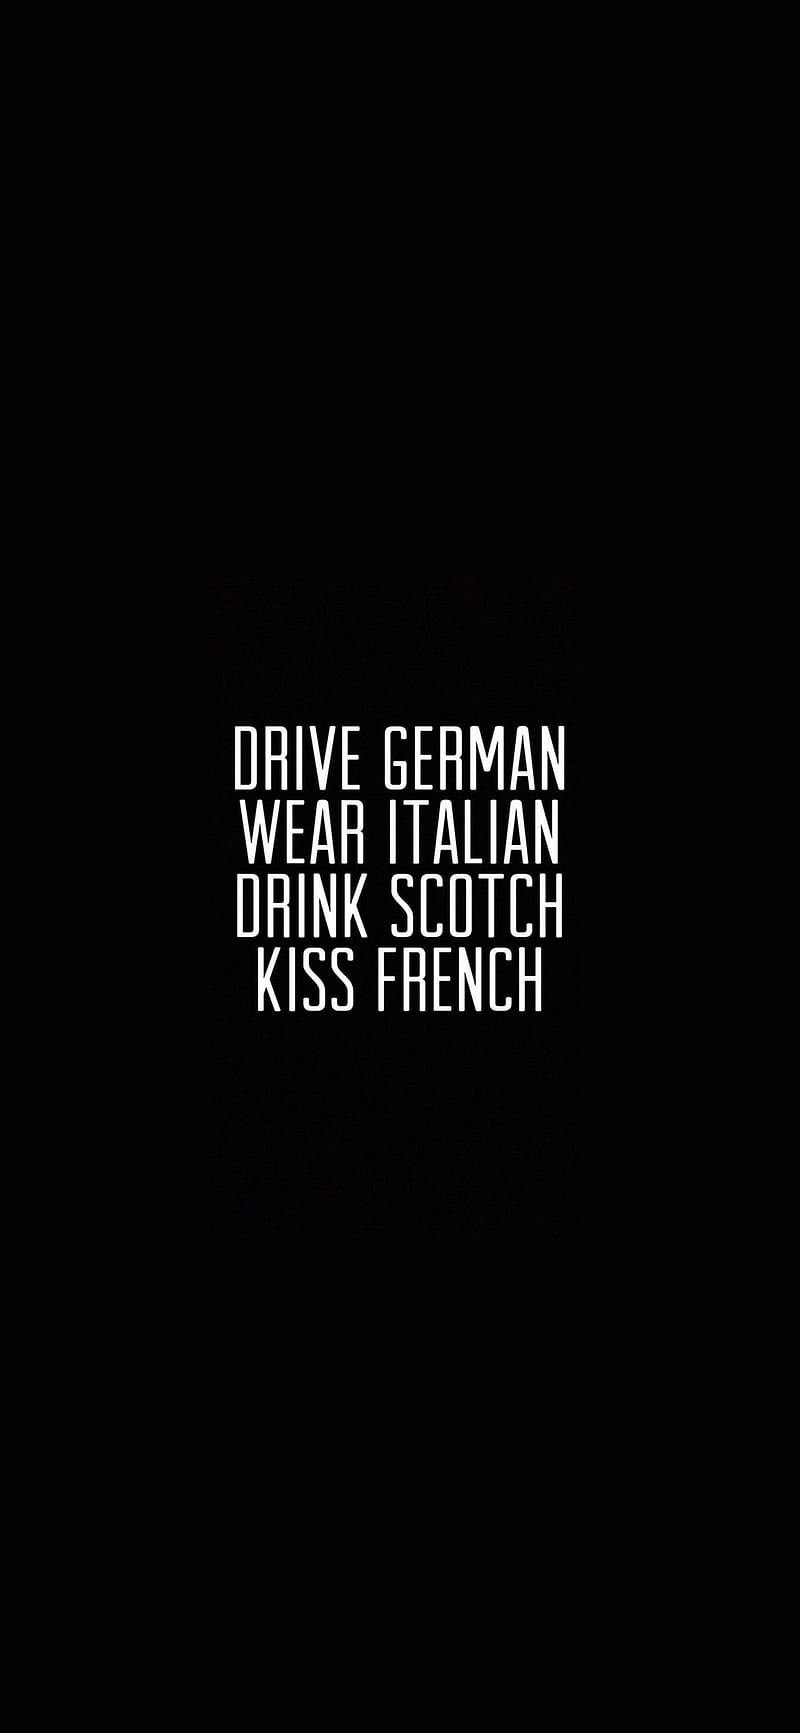 Advice, drink, drive, french, german, italian, kiss, quotes, sayings, scotch, wear, HD phone wallpaper